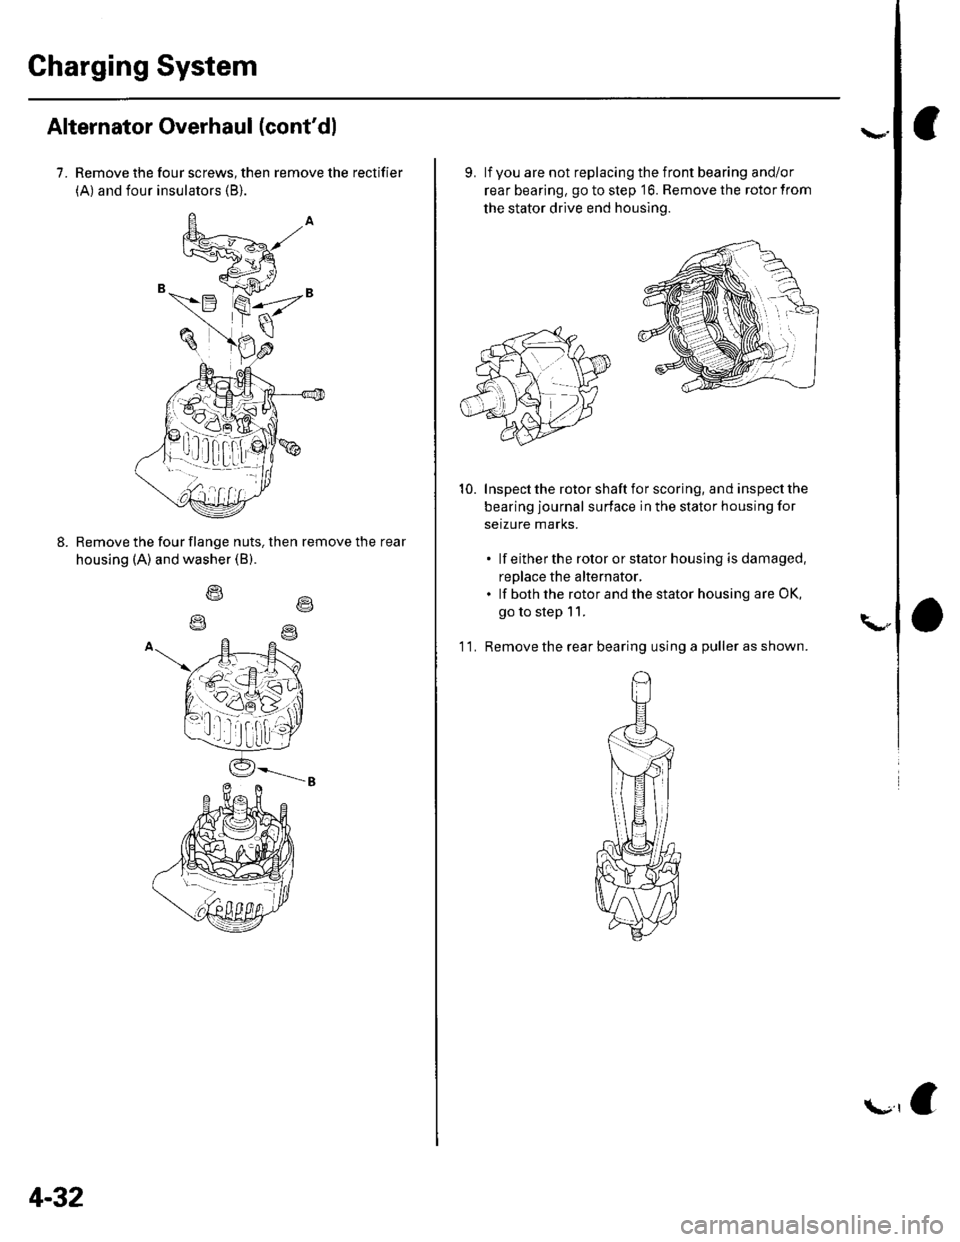 HONDA CIVIC 2003 7.G Workshop Manual Charging System
Alternator Overhaul (contdl
7. Remove the four screws, then remove the rectifier
(A) and four insulators (B).
Remove the four flange nuts, then remove the rear
housing (A) and washer 